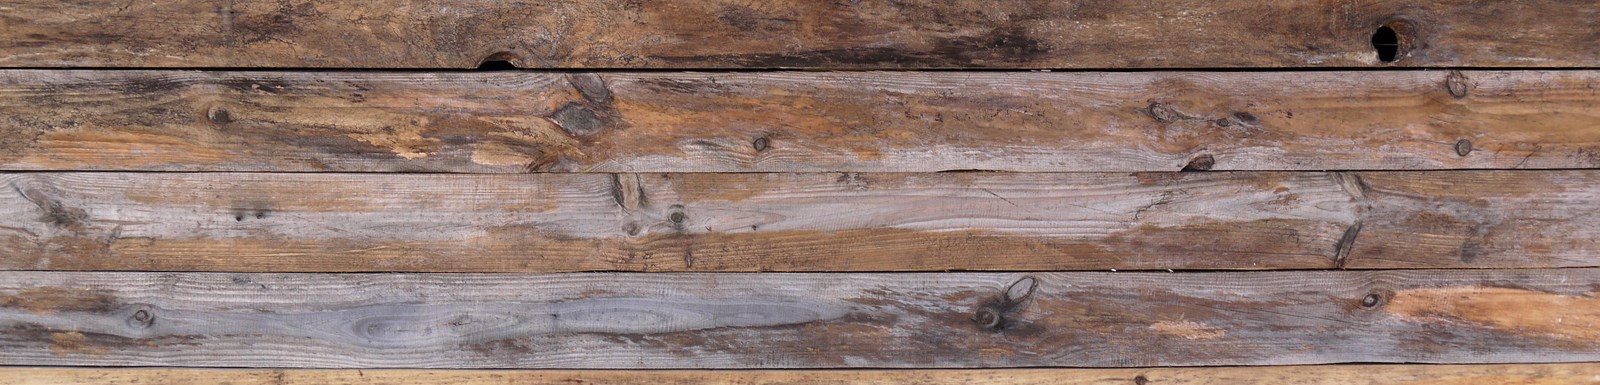 old pine board texture